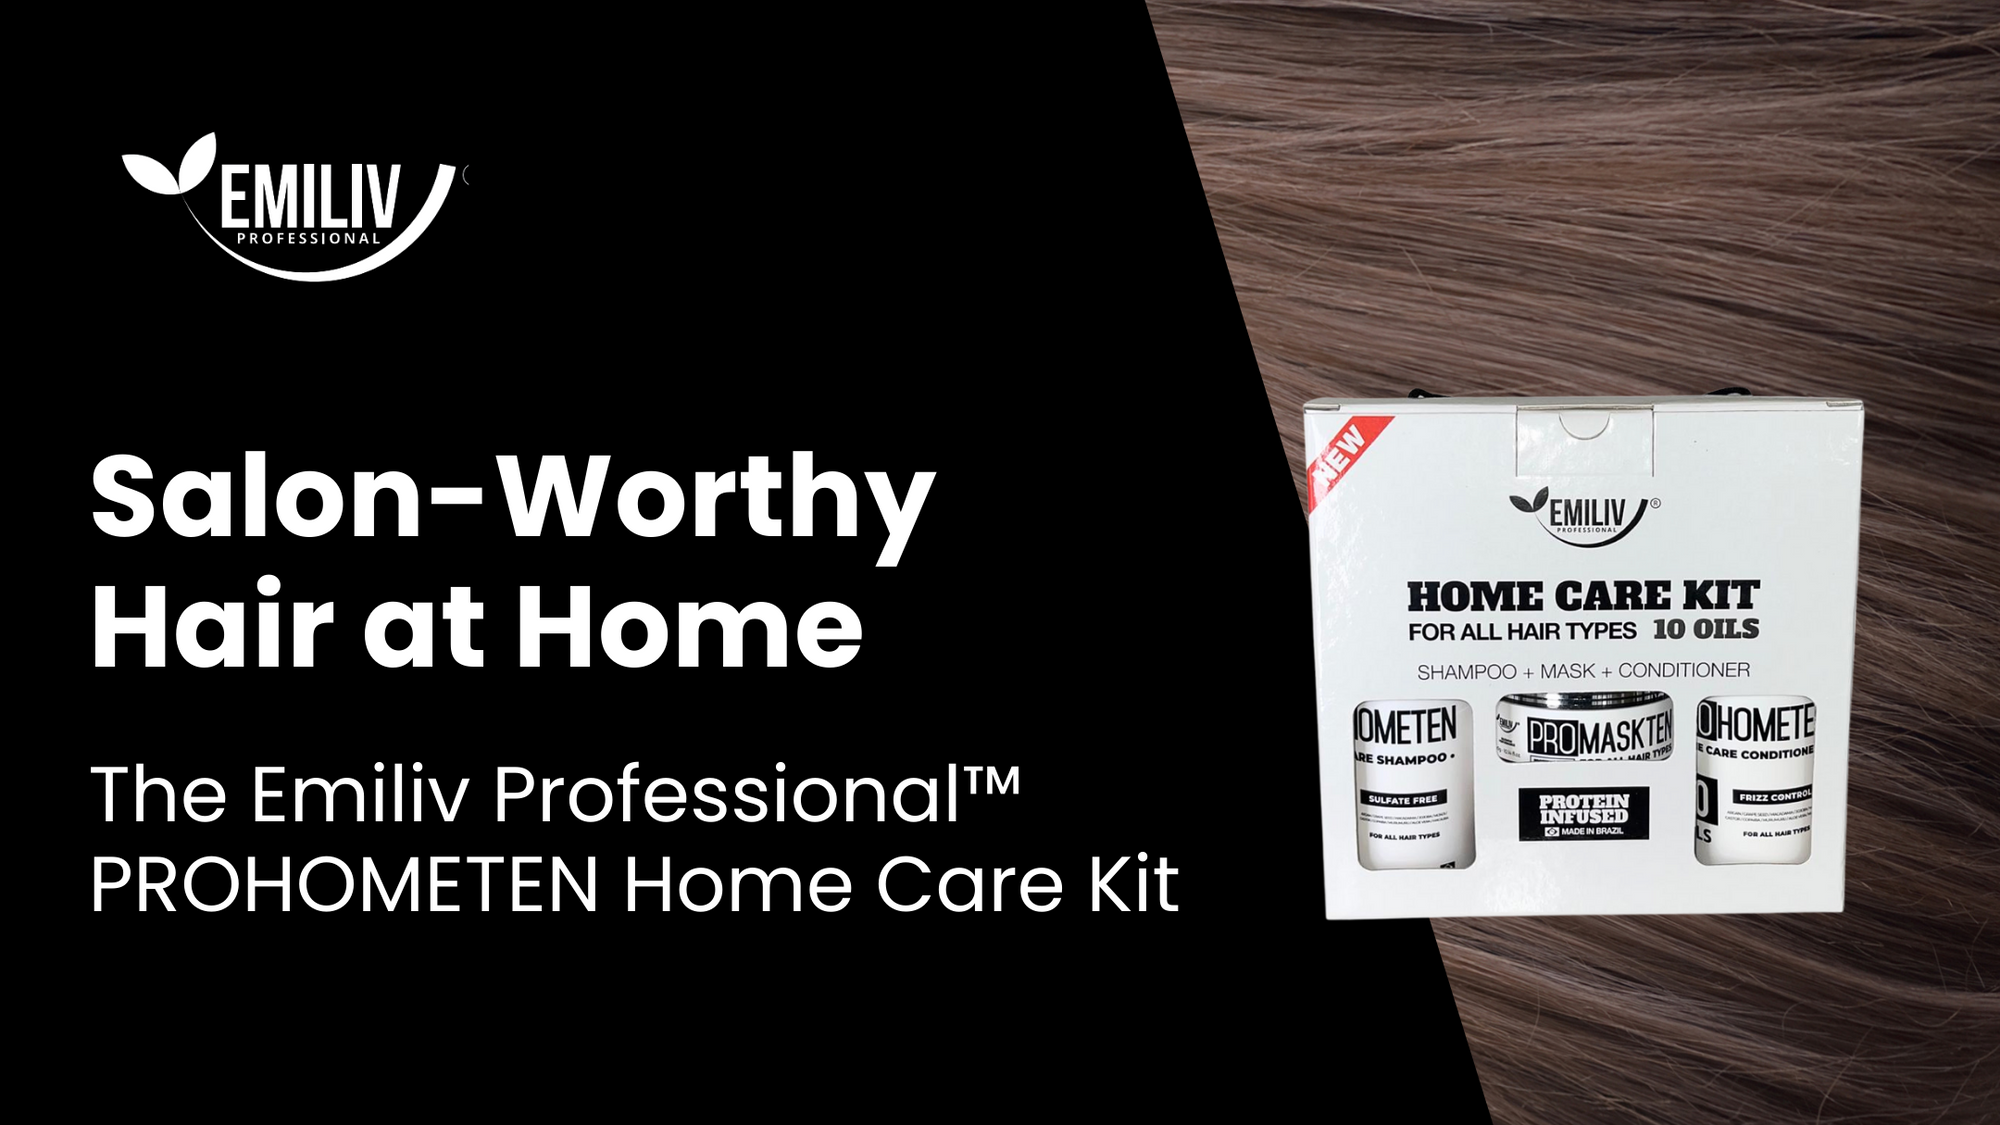 Salon-Worthy Hair at Home: The Emiliv Professional™ PROHOMETEN Home Care Kit